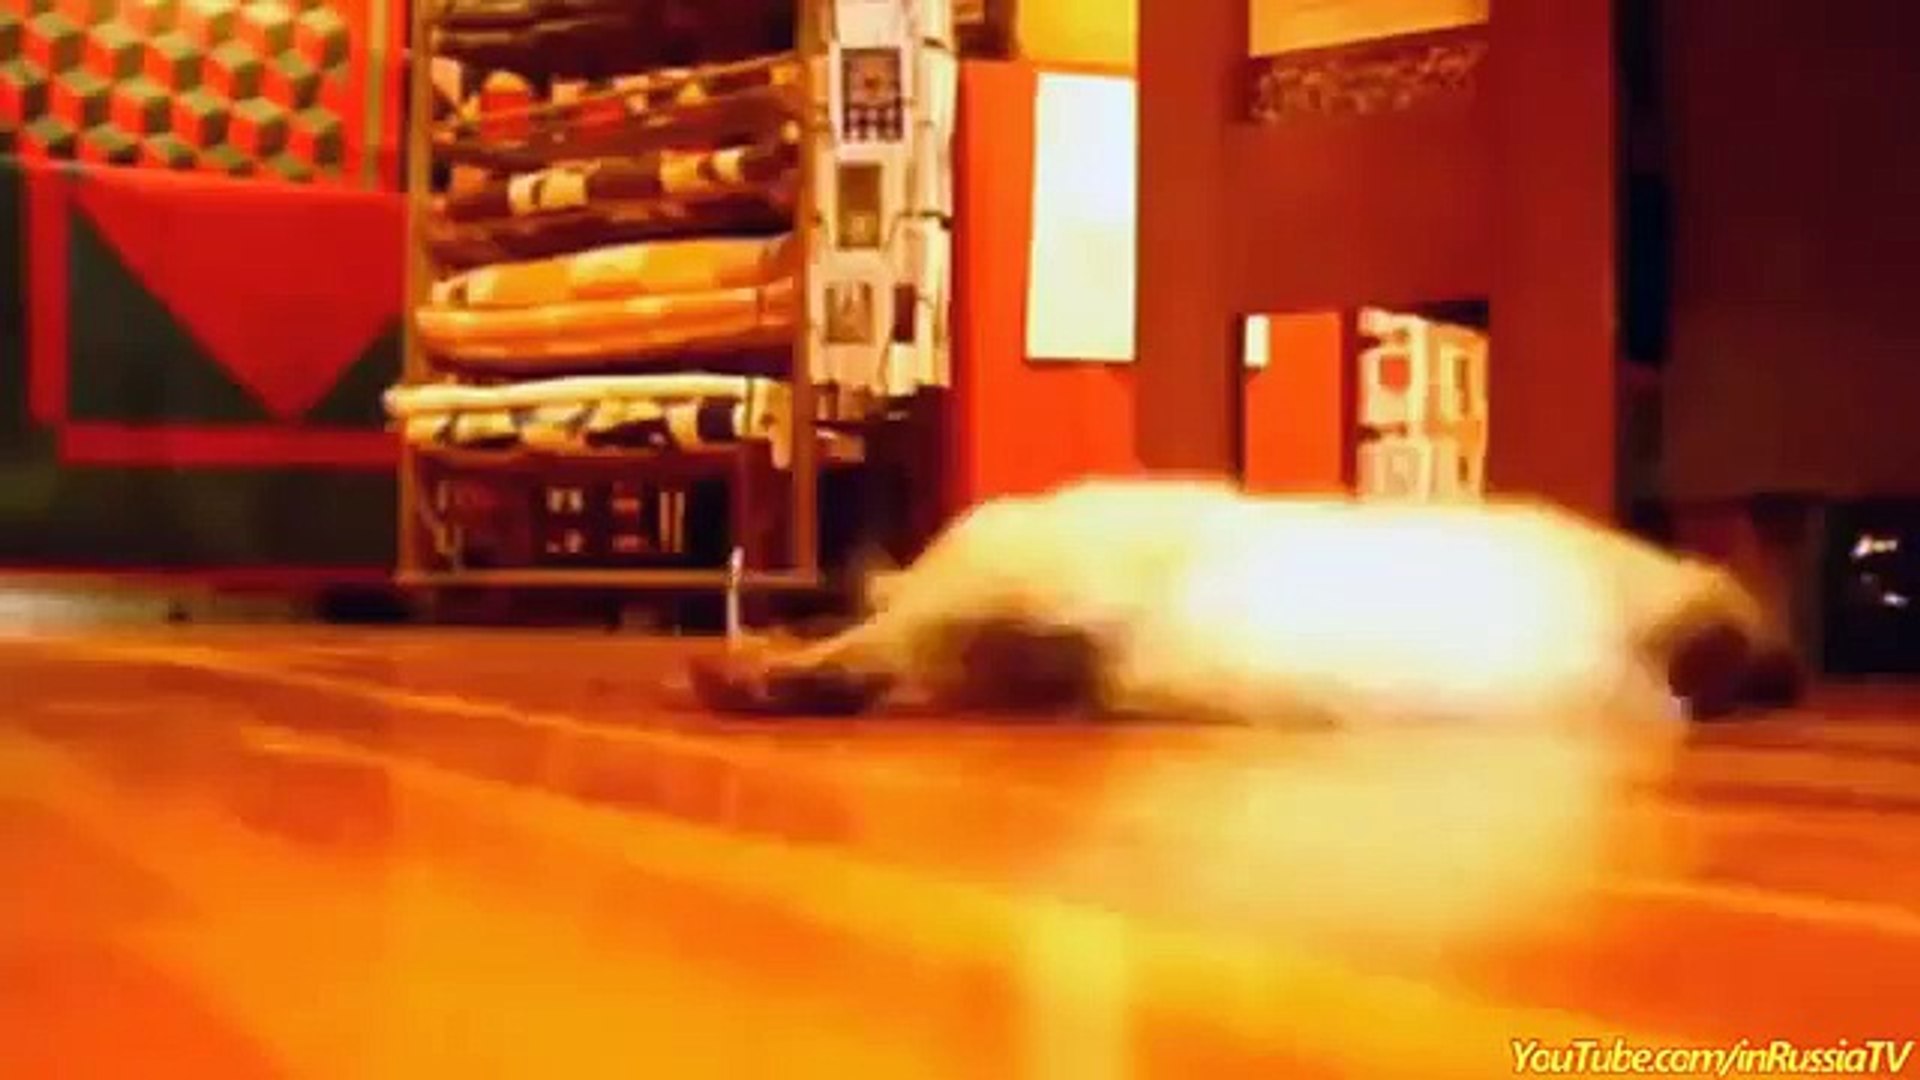 FUNNY VIDEOS: Funny Cats - Funny Cat Videos - Funny Animals - Cats Funny Sliding Compilation